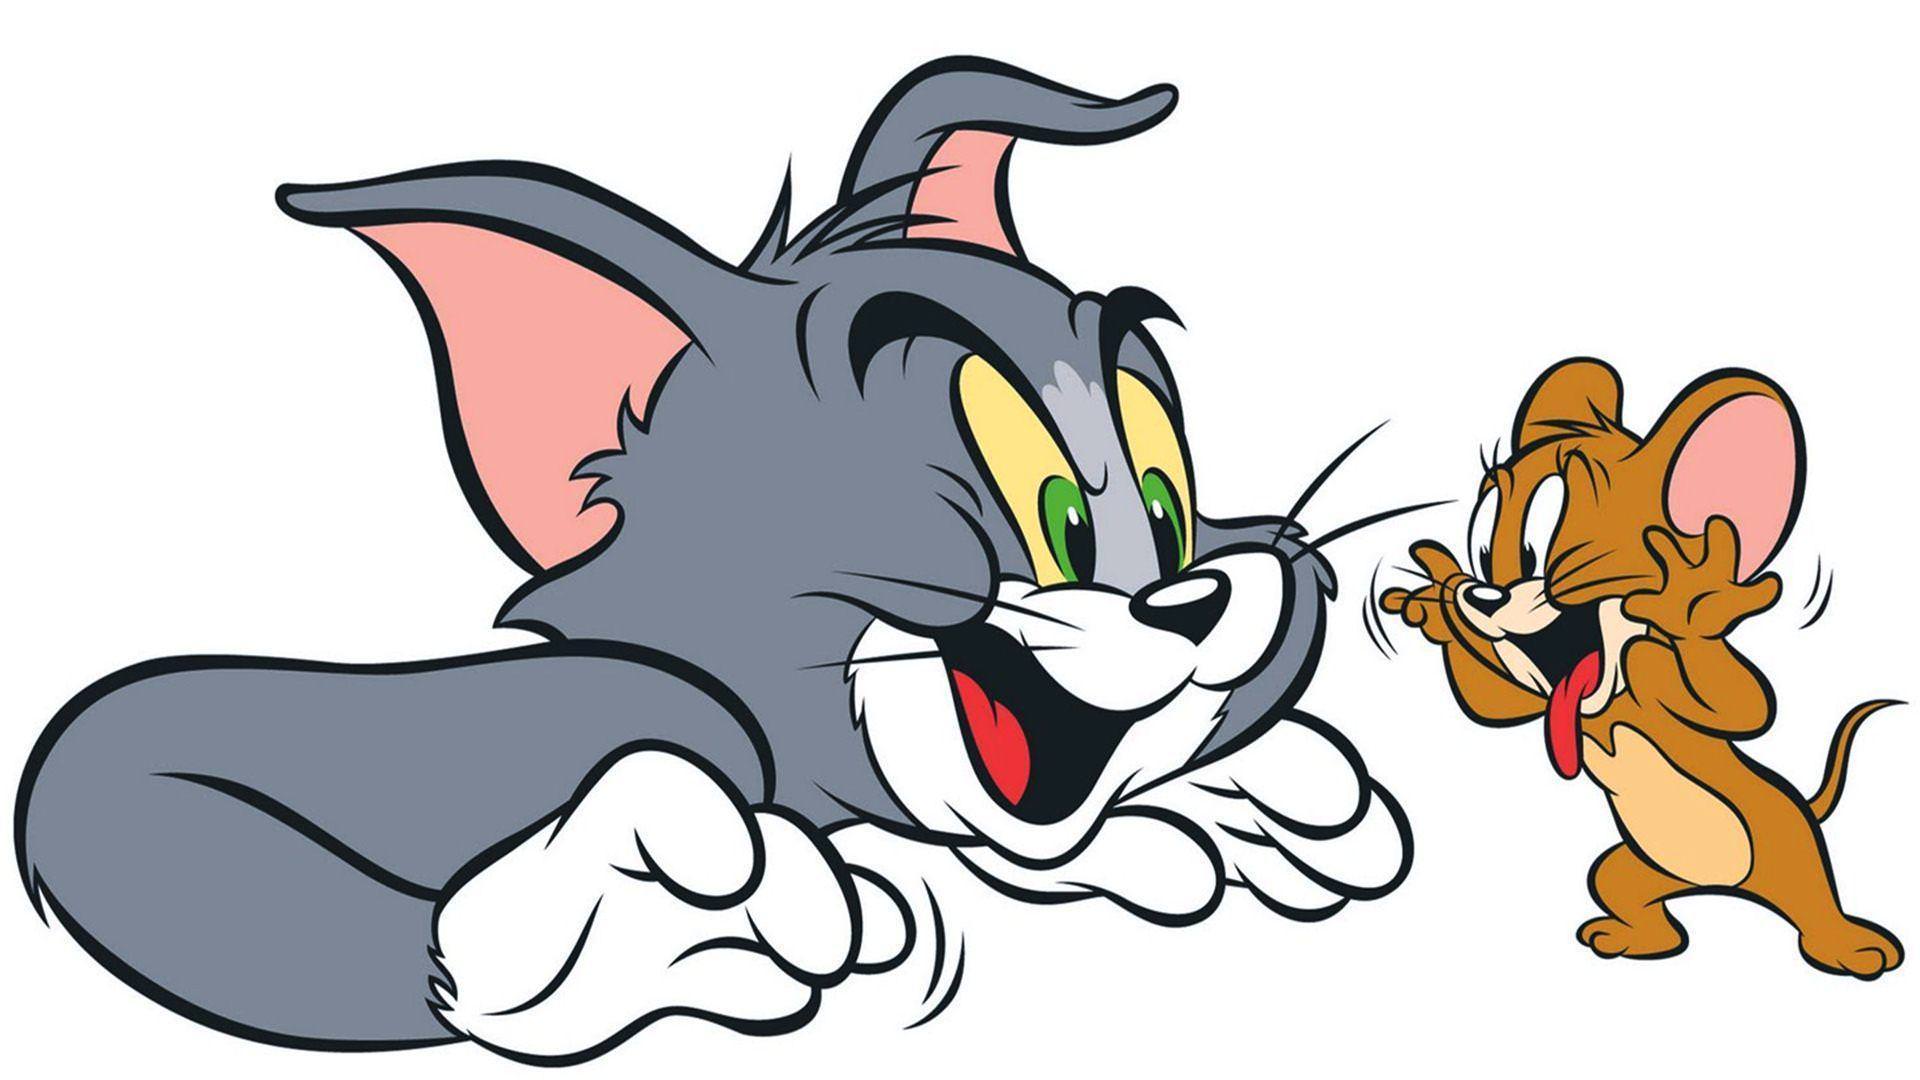 508857 Tom and jerry Mouse Cat Tom Jerry  Rare Gallery HD Wallpapers